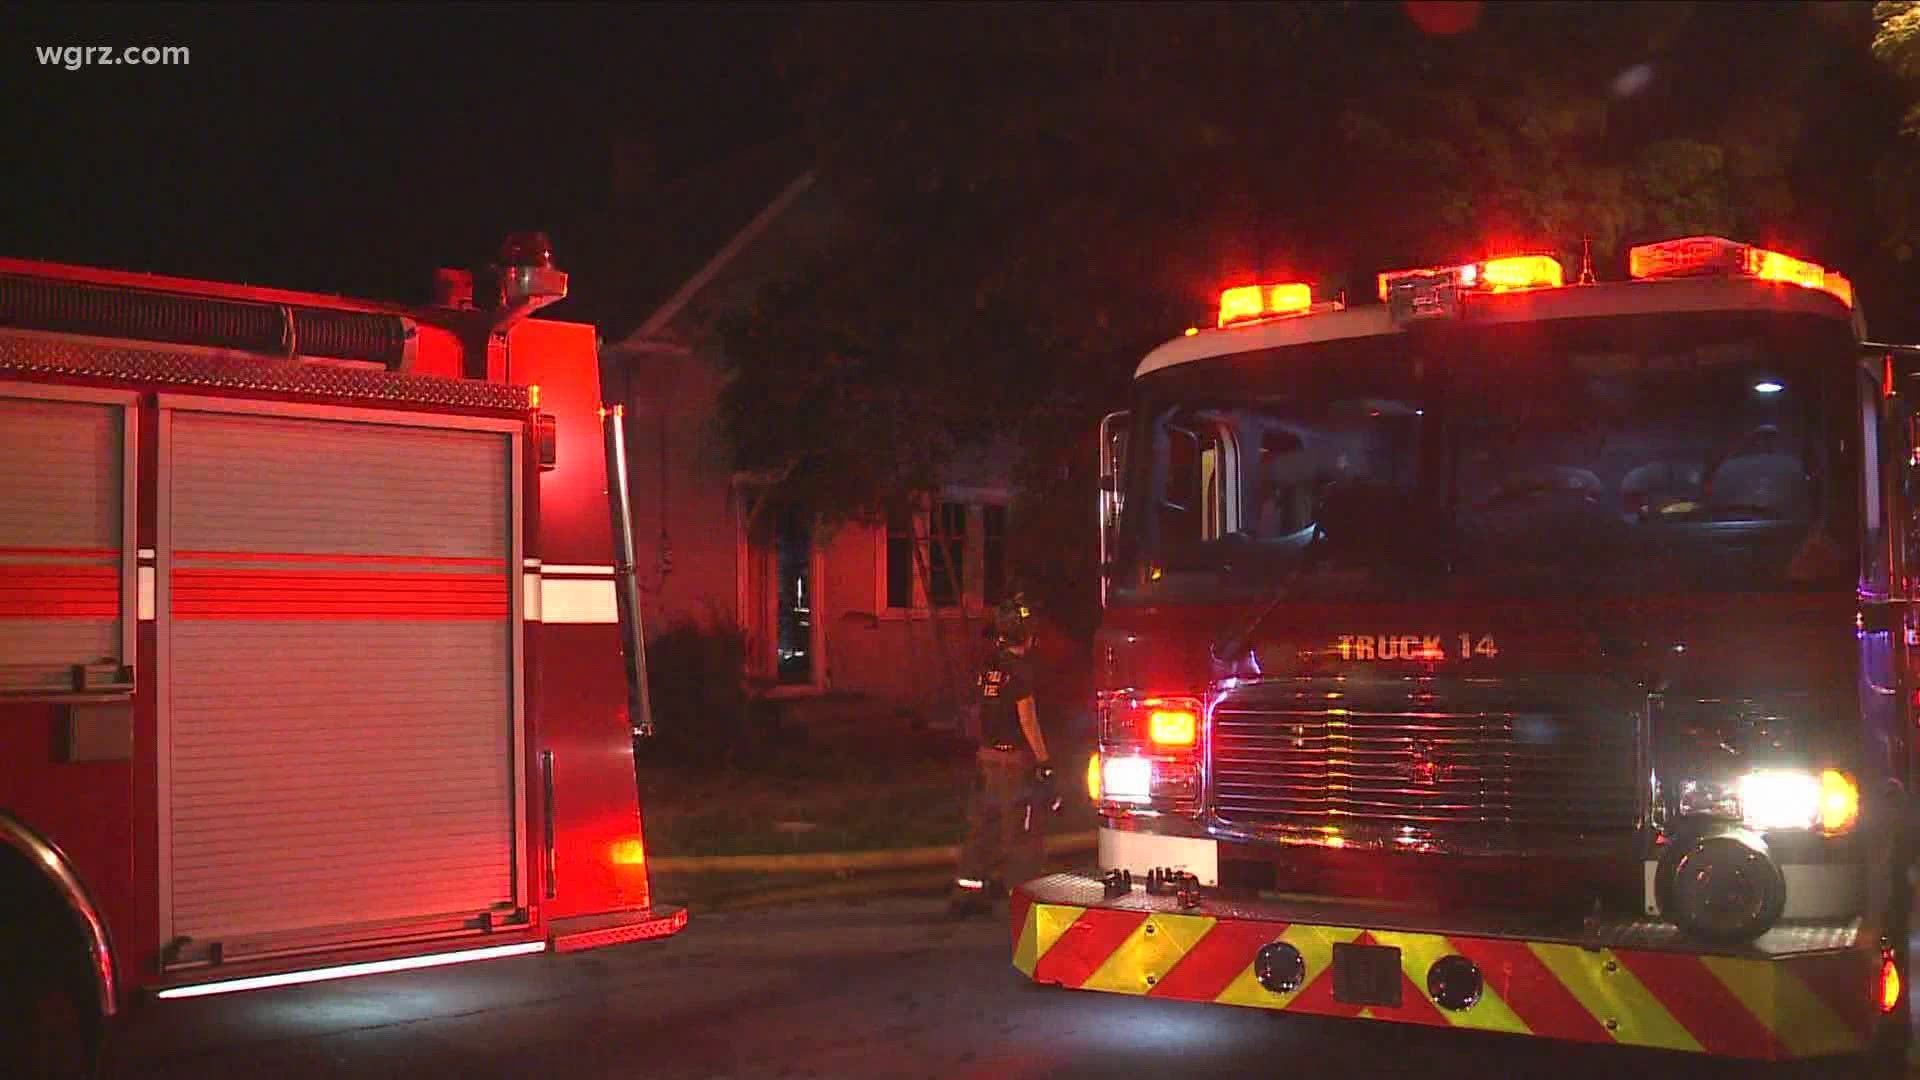 According to Buffalo Fire officials the fire started a little after 12:30 a.m.